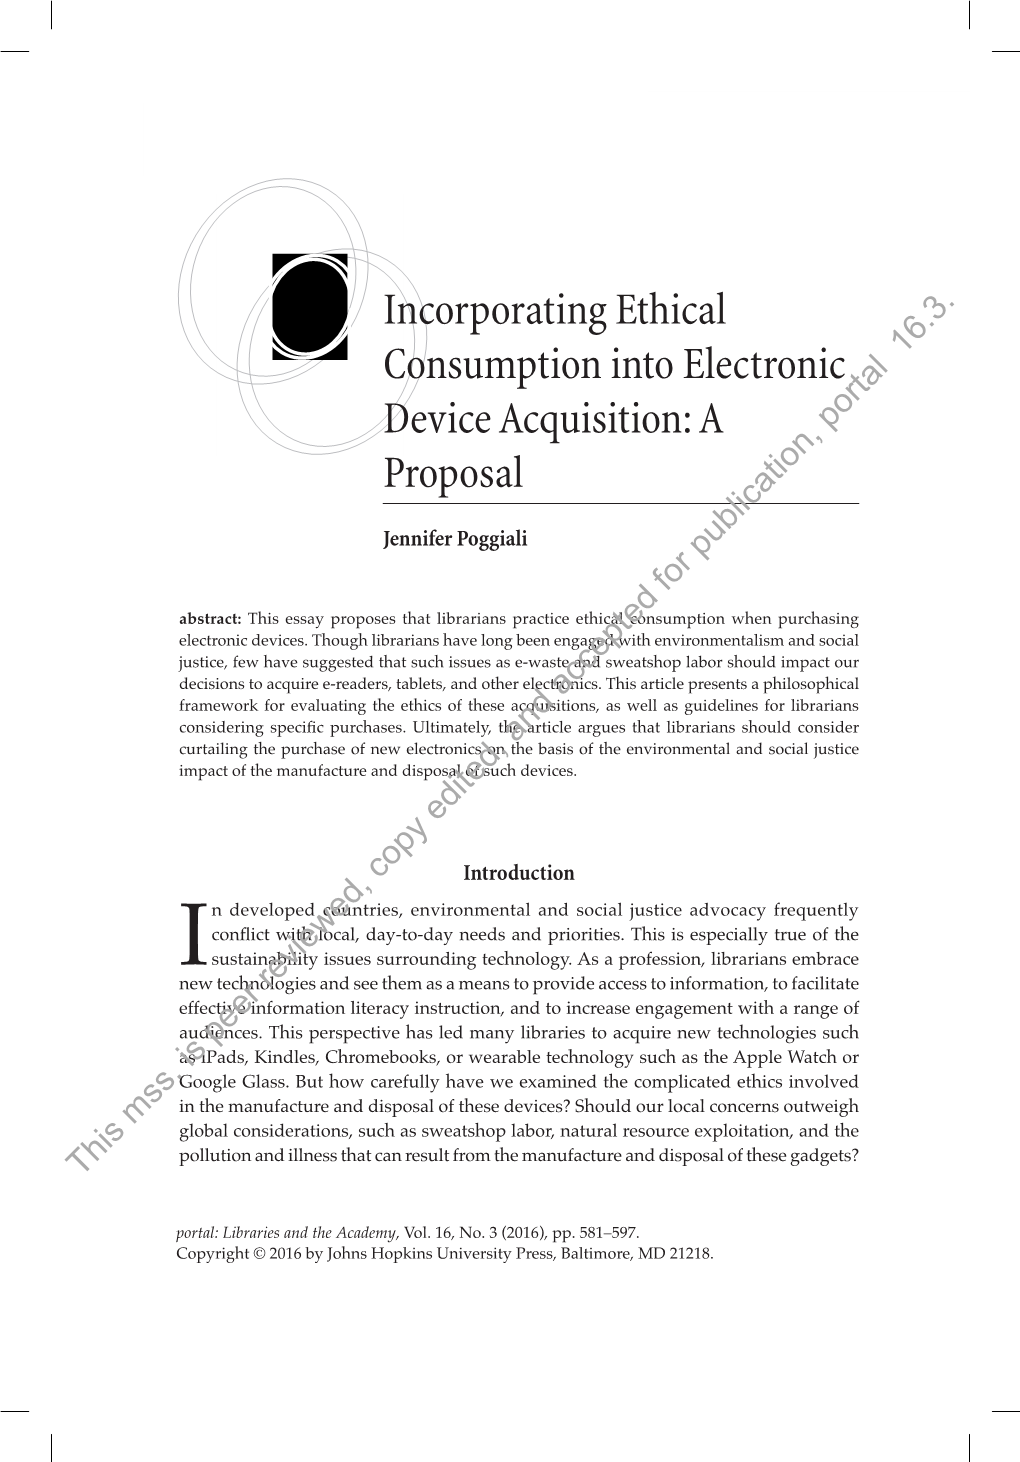 Incorporating Ethical Consumption Into Electronic Device Acquisition: a Proposal